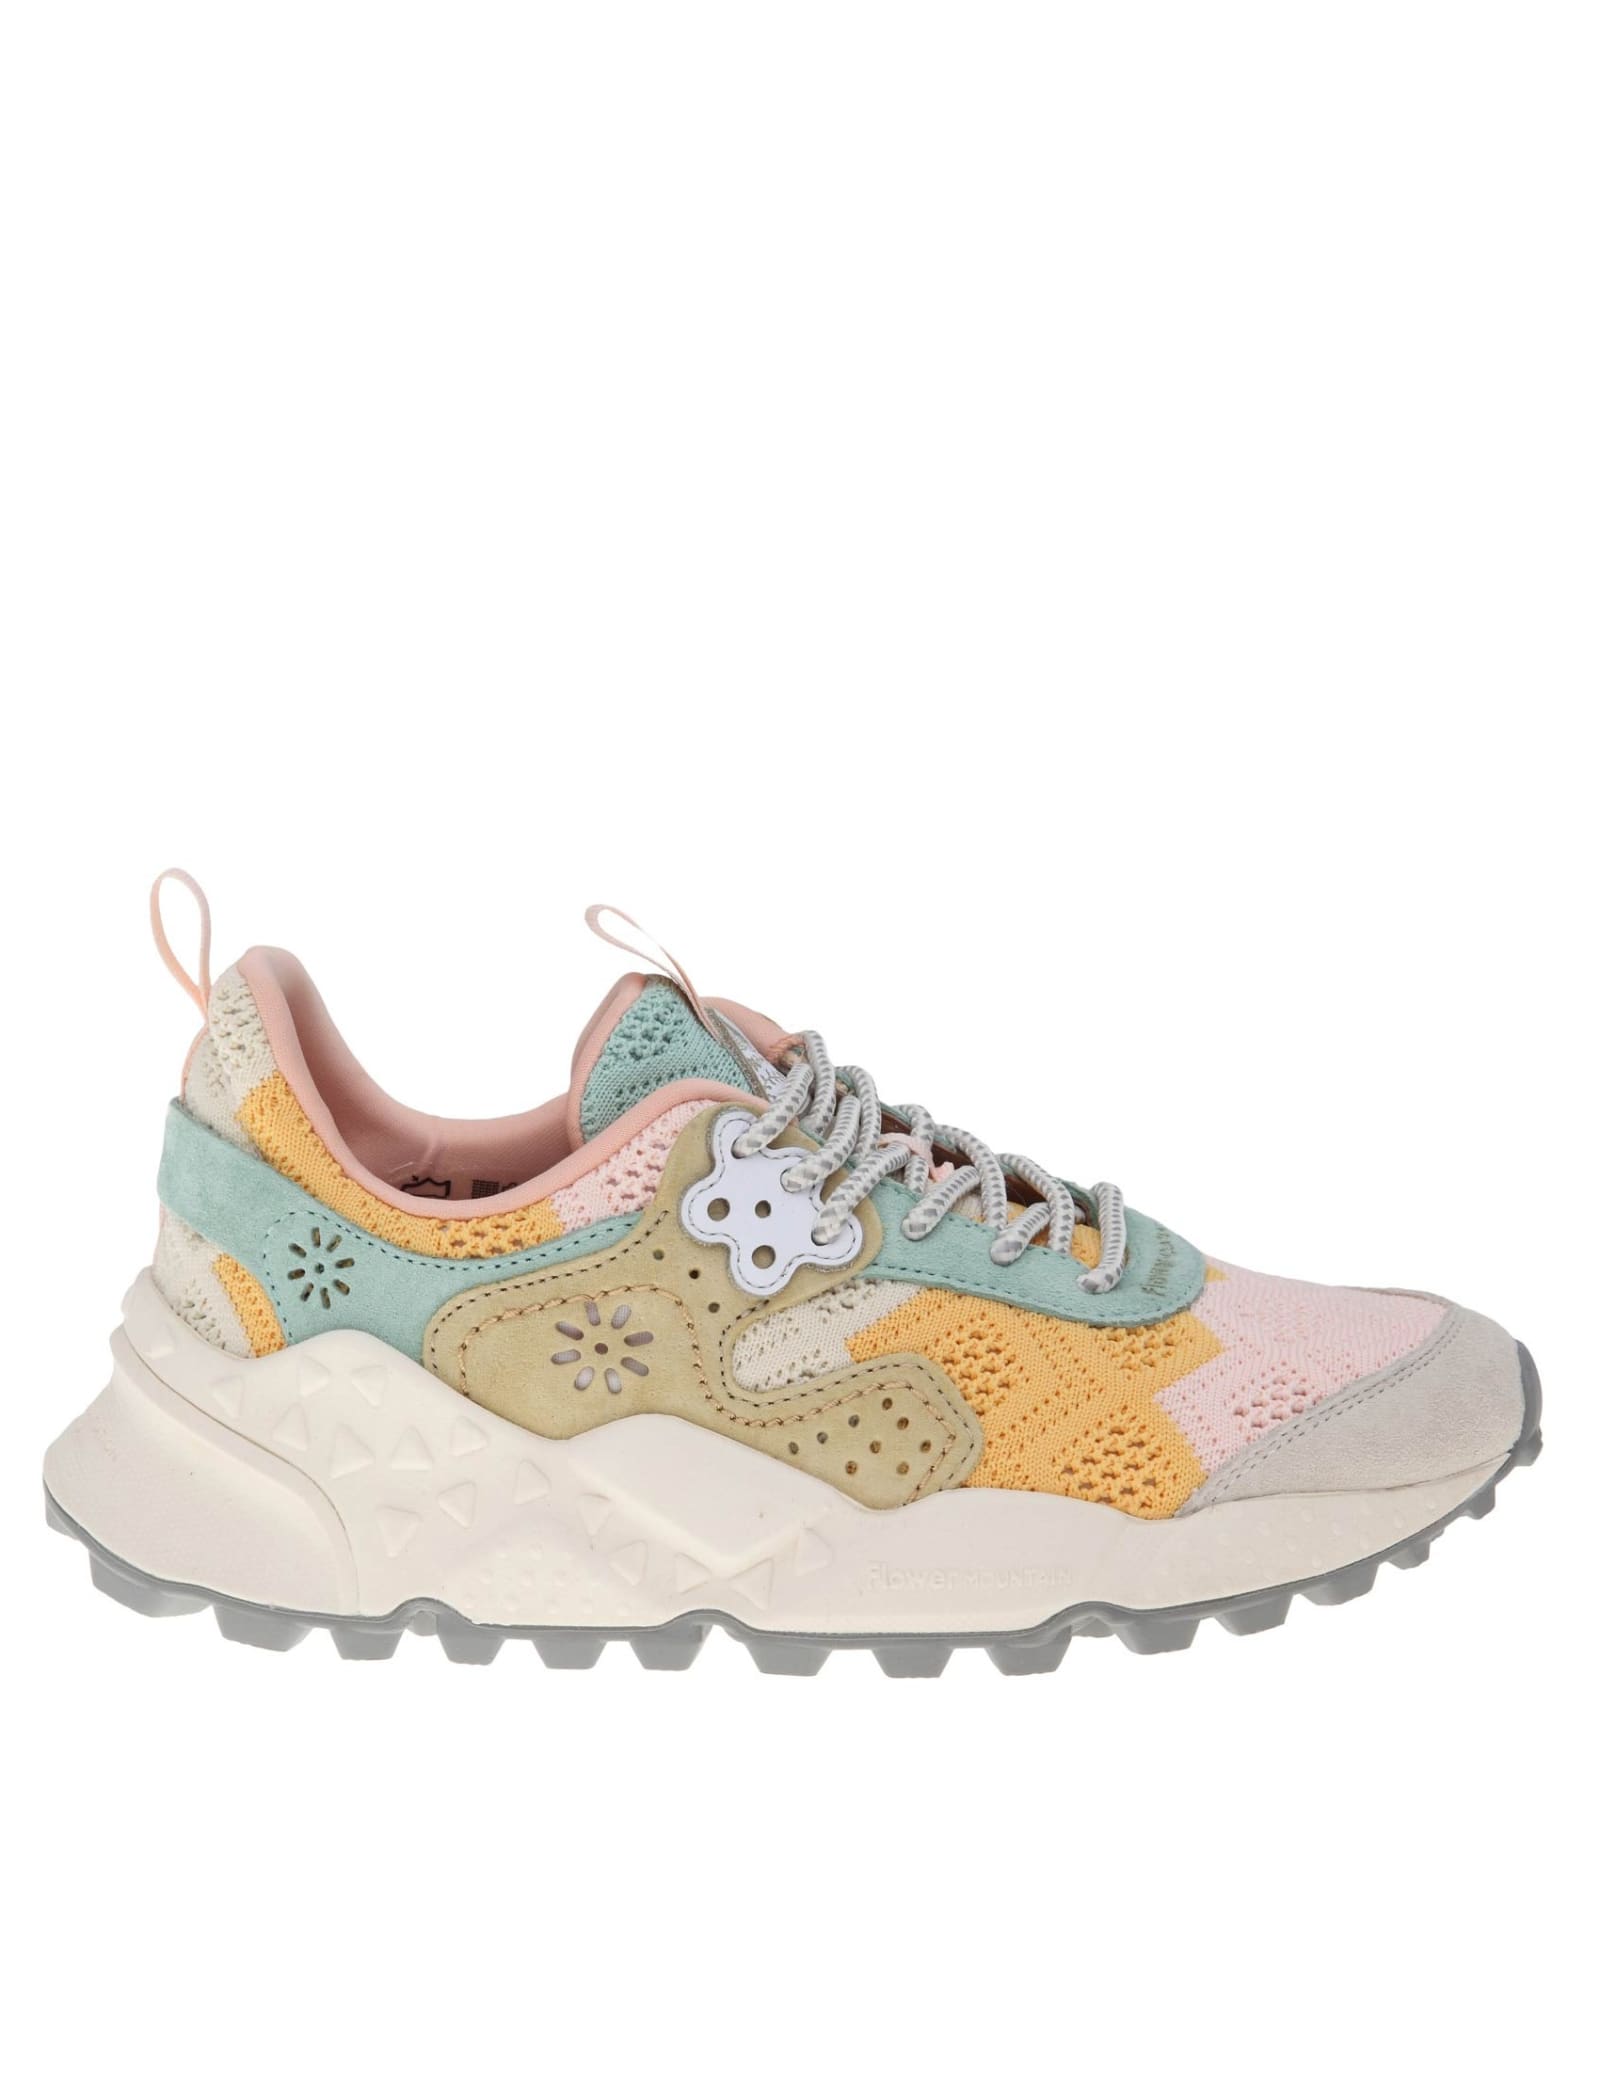 FLOWER MOUNTAIN KOTETSU SNEAKERS IN SUEDE AND FABRIC